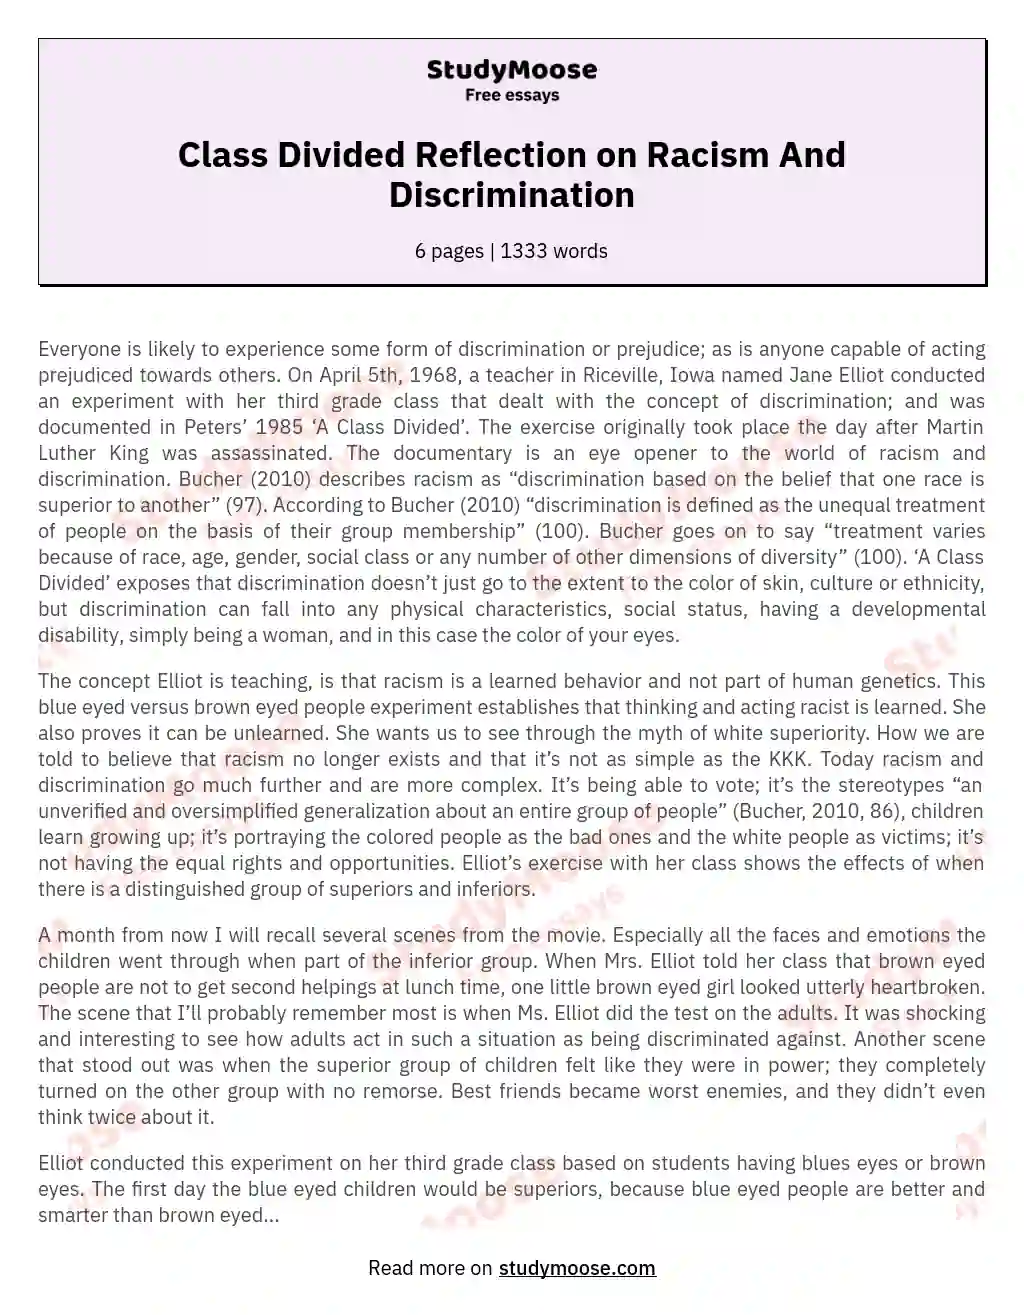 Class Divided Reflection on Racism And Discrimination essay